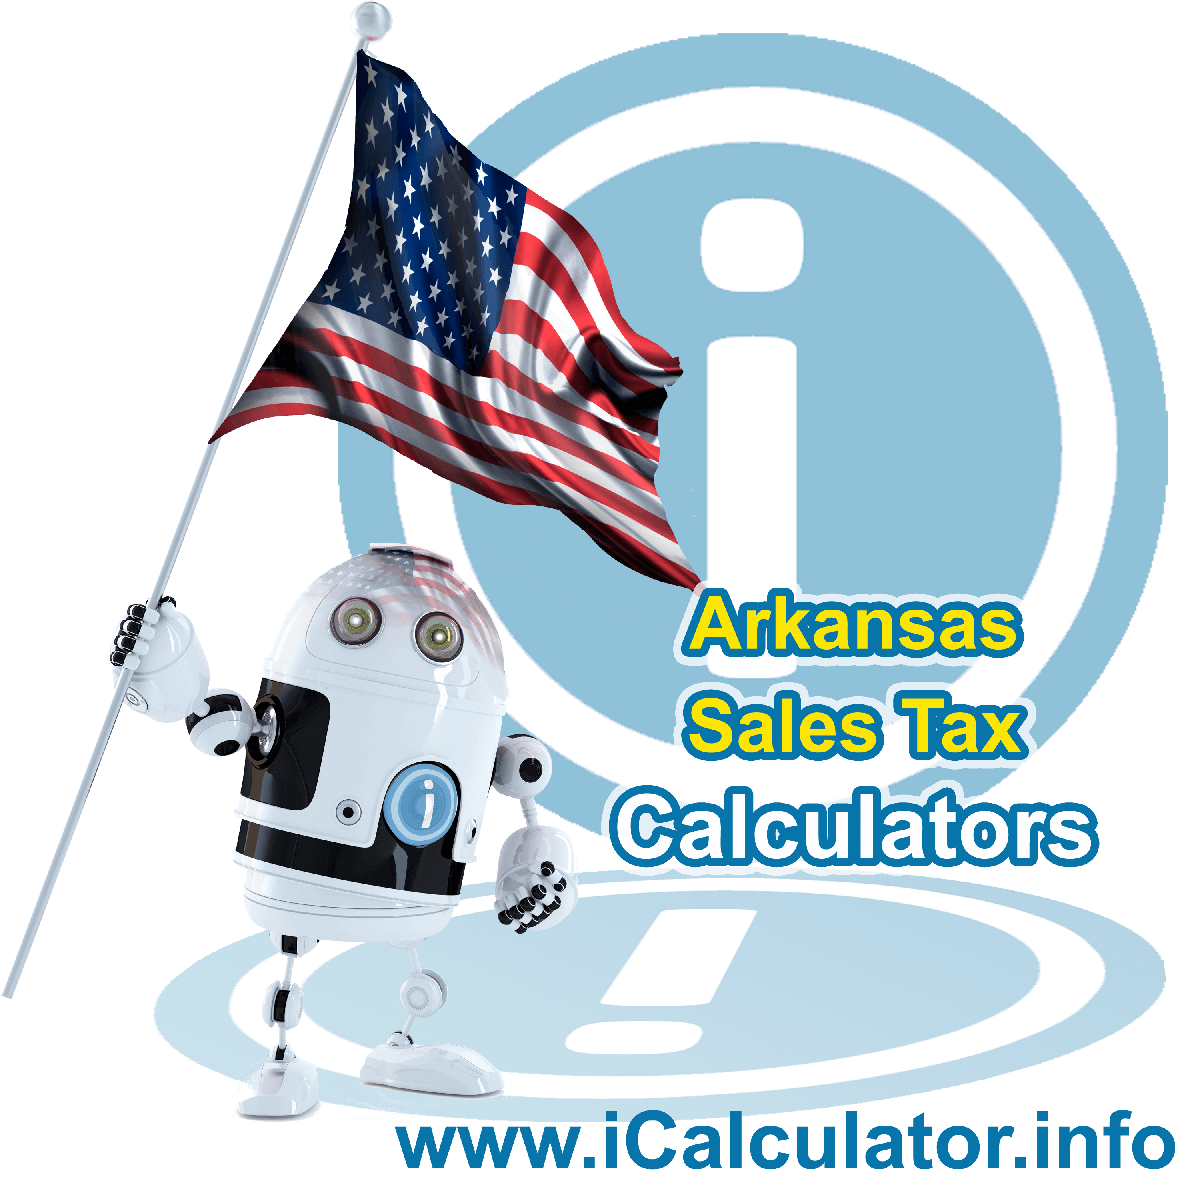 Tontitown Sales Rates: This image illustrates a calculator robot calculating Tontitown sales tax manually using the Tontitown Sales Tax Formula. You can use this information to calculate Tontitown Sales Tax manually or use the Tontitown Sales Tax Calculator to calculate sales tax online.